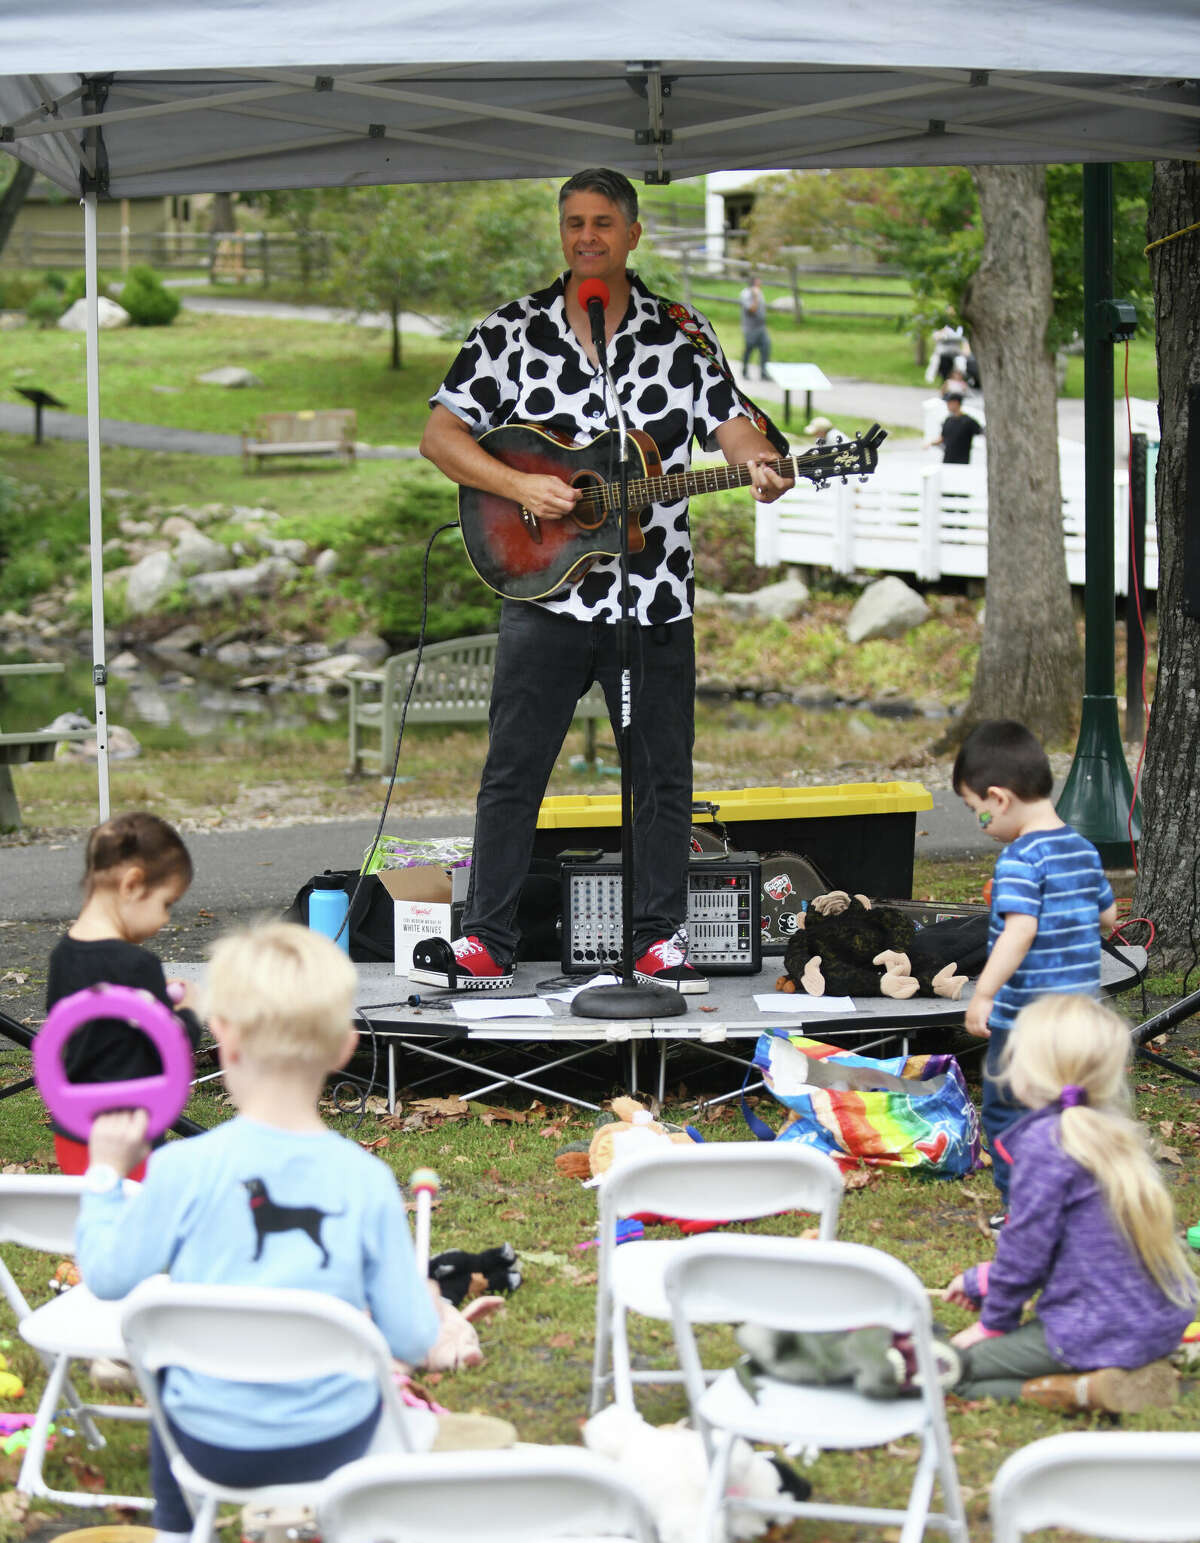 Tom Weber performs children's songs during Fall Family Fest Sundays at the Stamford Museum & Nature Center in Stamford, Conn. on Sunday, September 25, 2022. The children's event included a rock climbing wall, bird program of prey, live music, face painting, games, crafts and an apple slingshot.  Fall Family Fest continues October 2 and 9 from 10 a.m. to 2 p.m. with online pre-registration recommended.